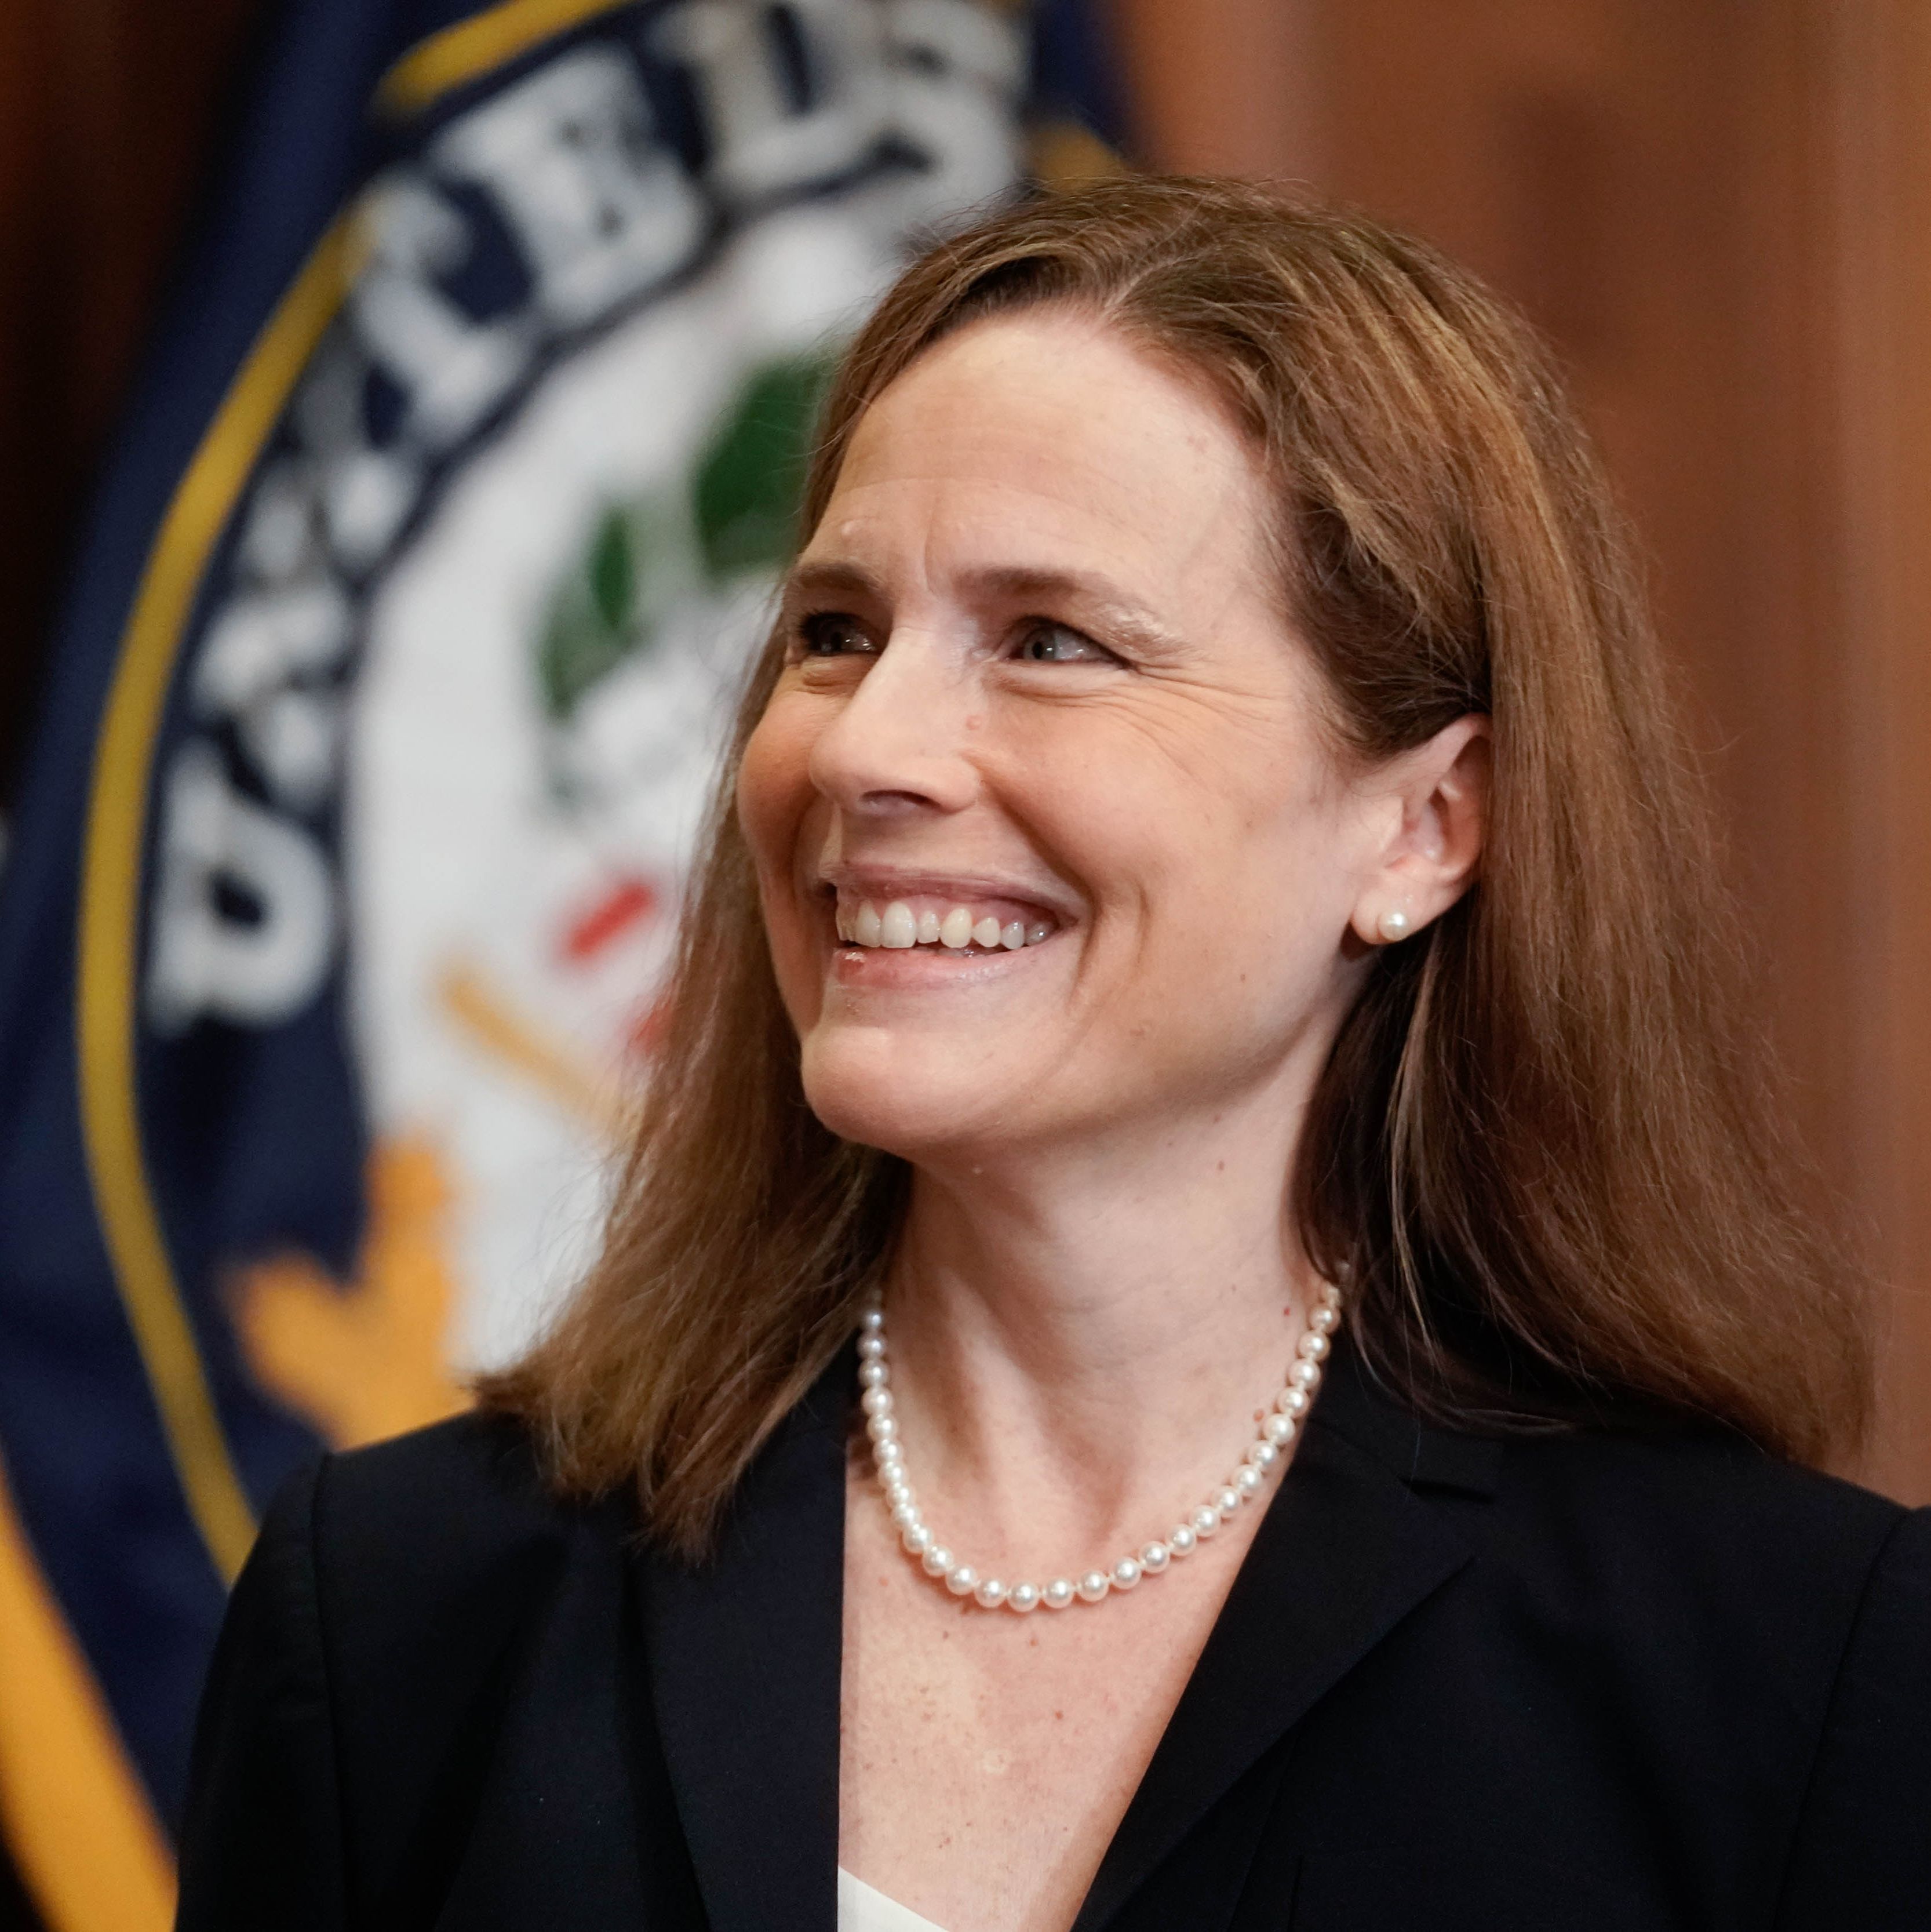 Unsurprisingly, Amy Coney Barrett's Weird Church Faces Allegations of Abuse